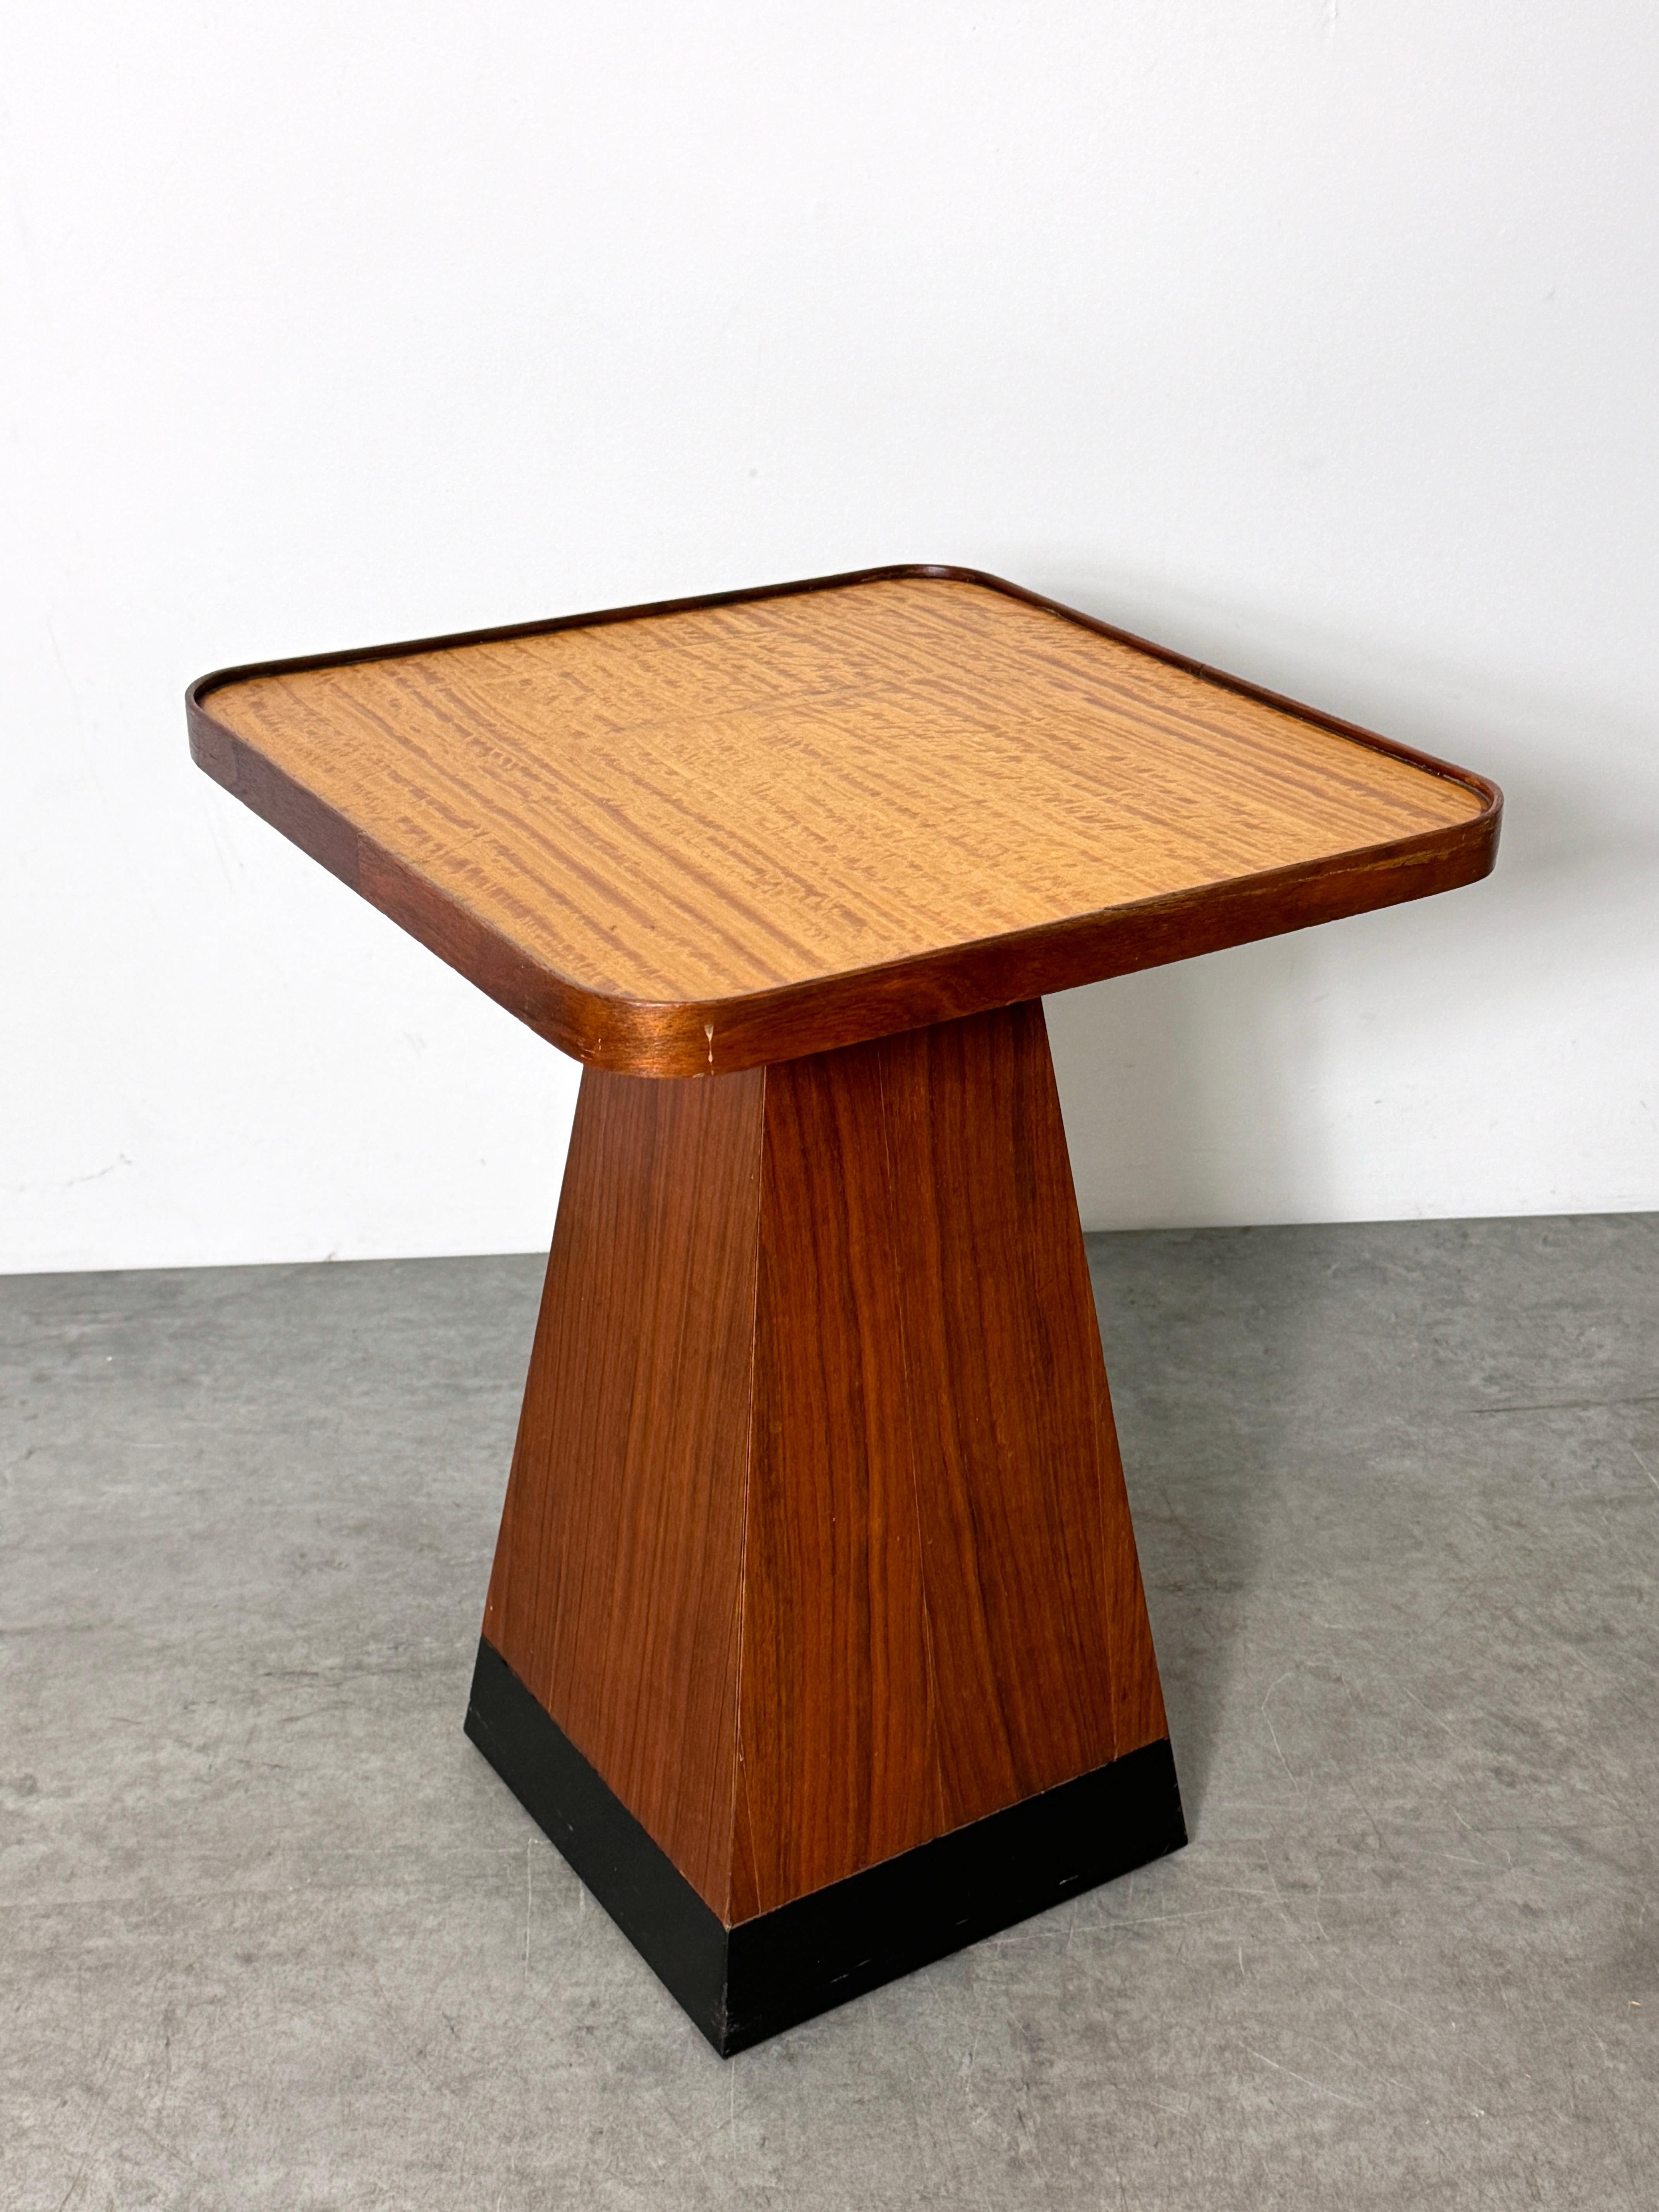 Mid Century Modern Walnut Satinwood Square Pyramid Side Pedestal Table 1970s For Sale 2